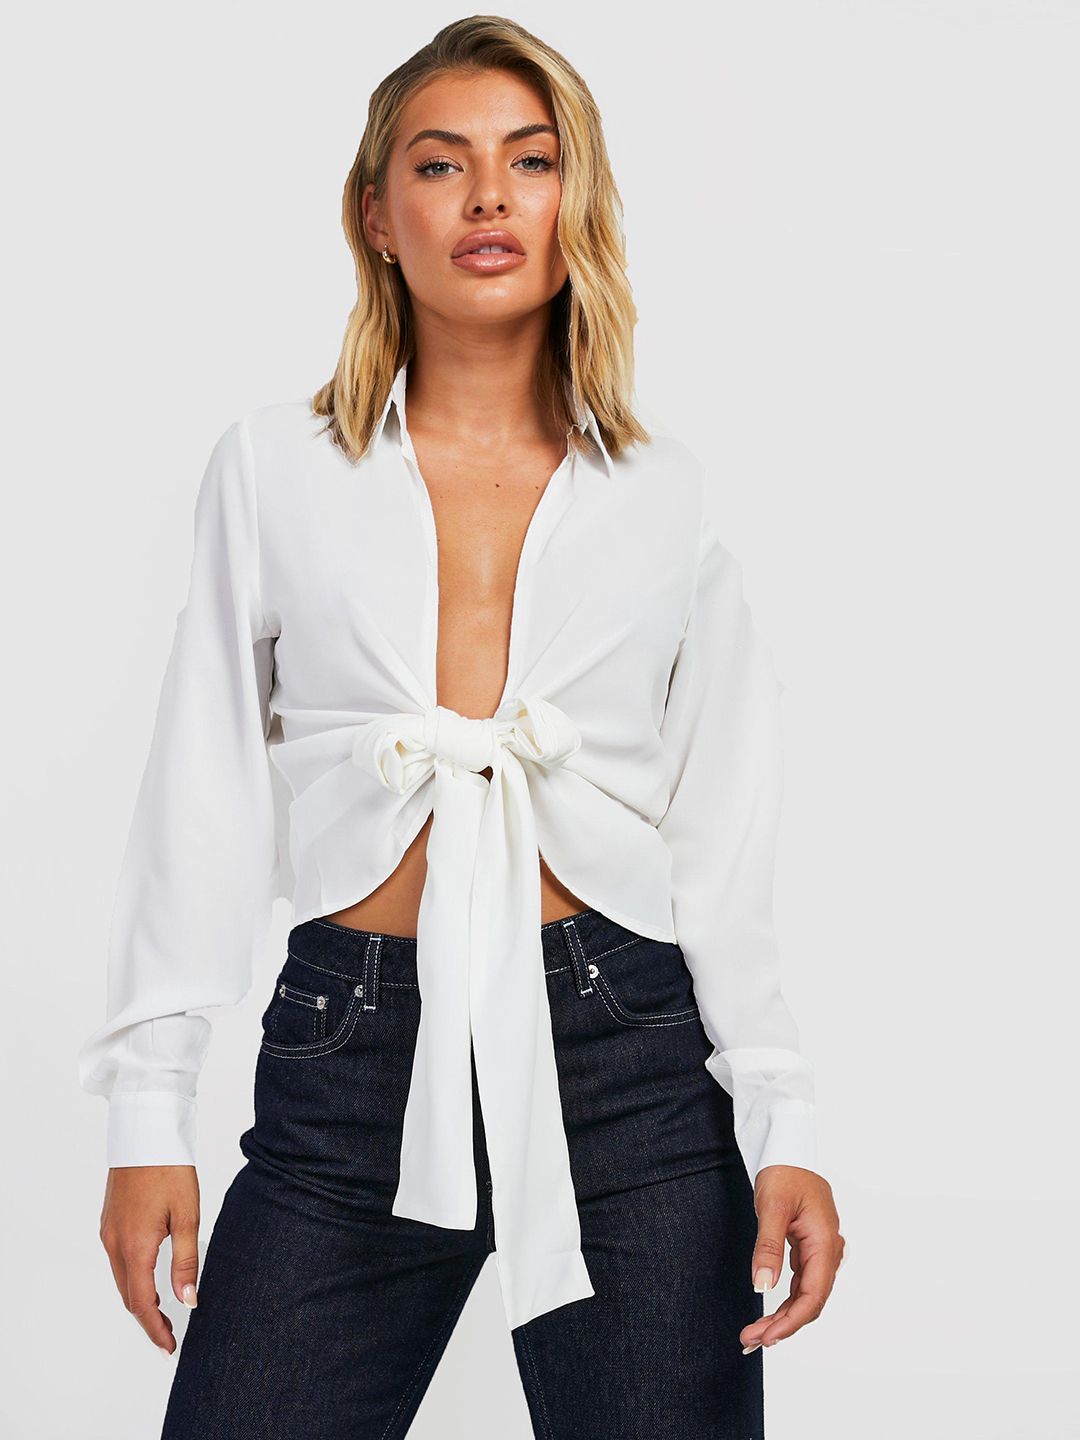 Boohoo Tie-Up Front Plunge Neck Shirt Style Top Price in India